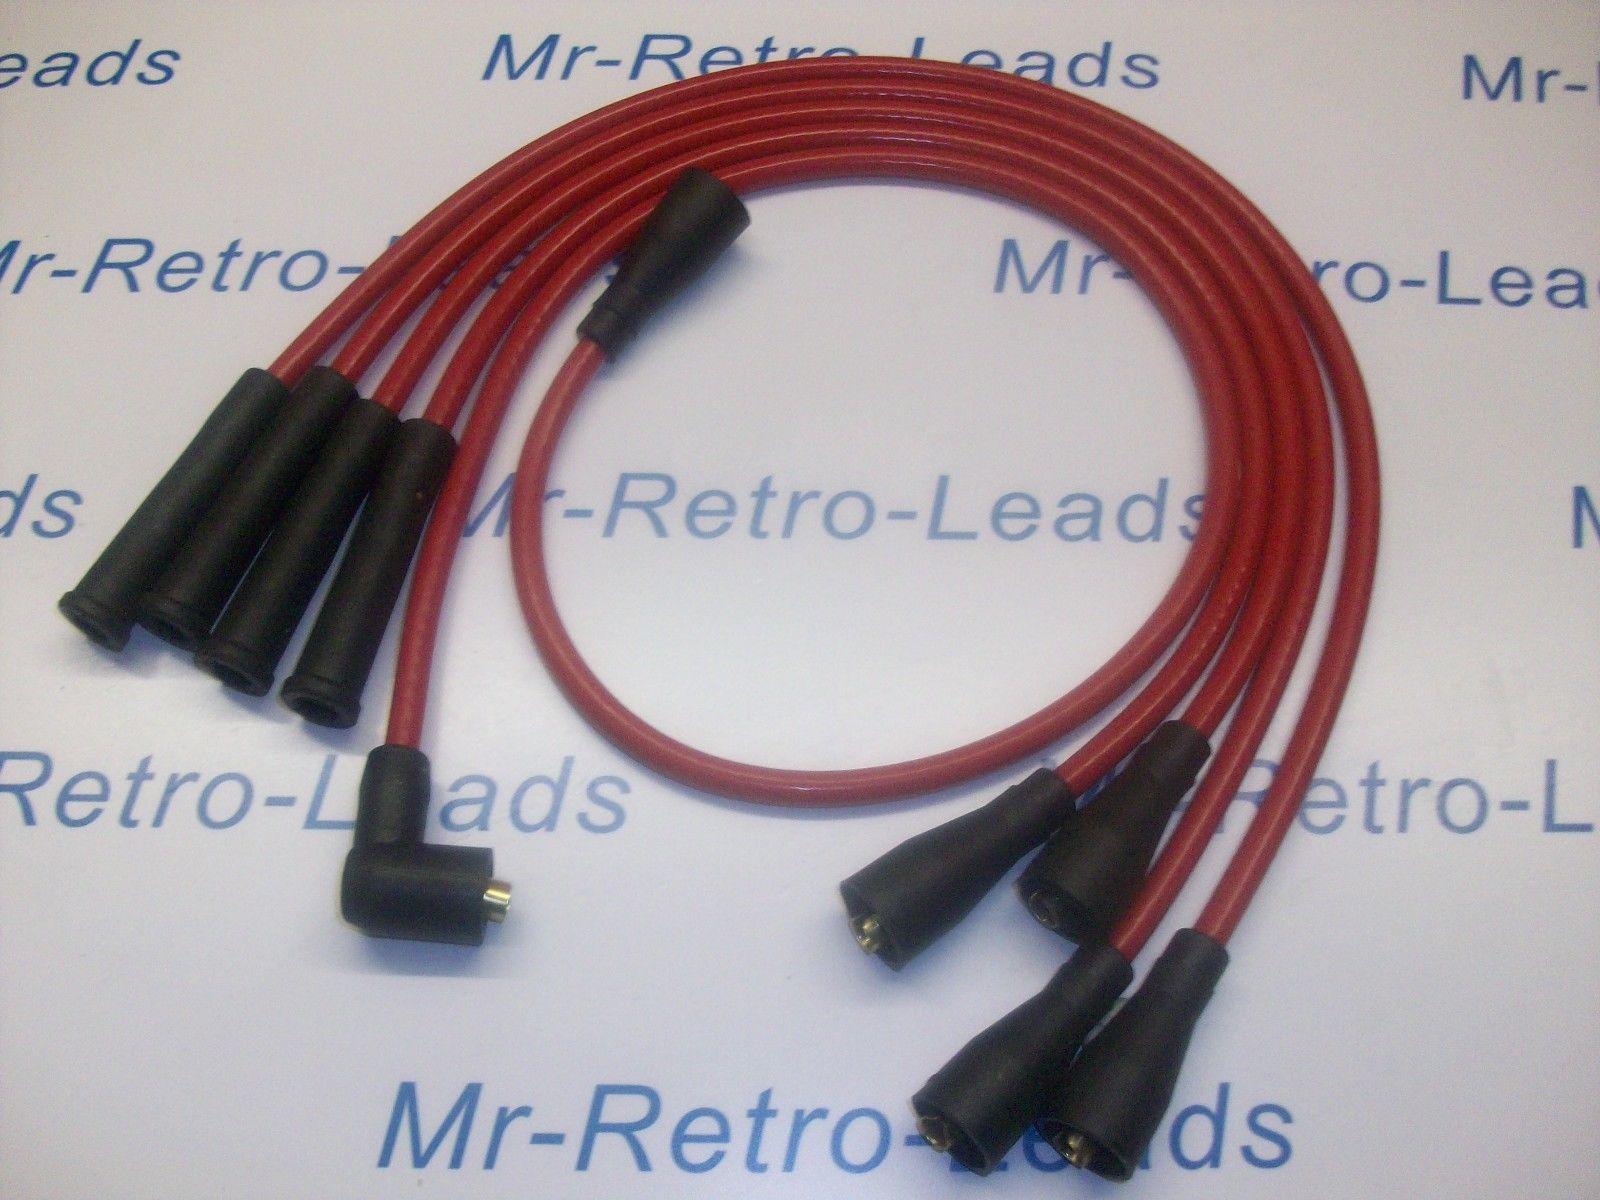 Red 8mm Performance Ignition Leads For Triumph Tr7 Late Type Quality Leads Ht..